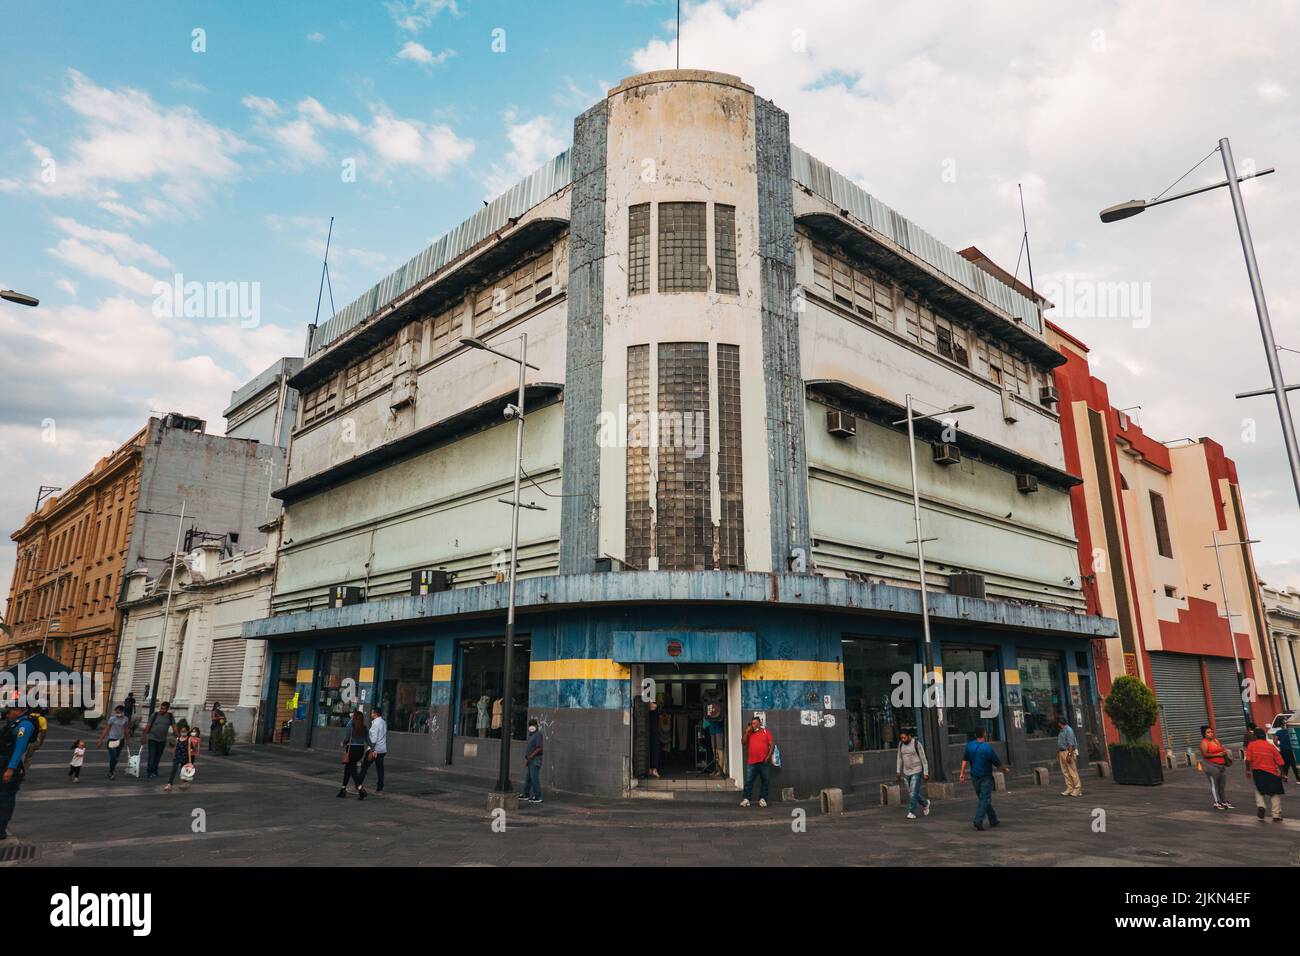 a rundown old art deco style building in San Salvador, El Salvador, on the corner of the central plaza Stock Photo